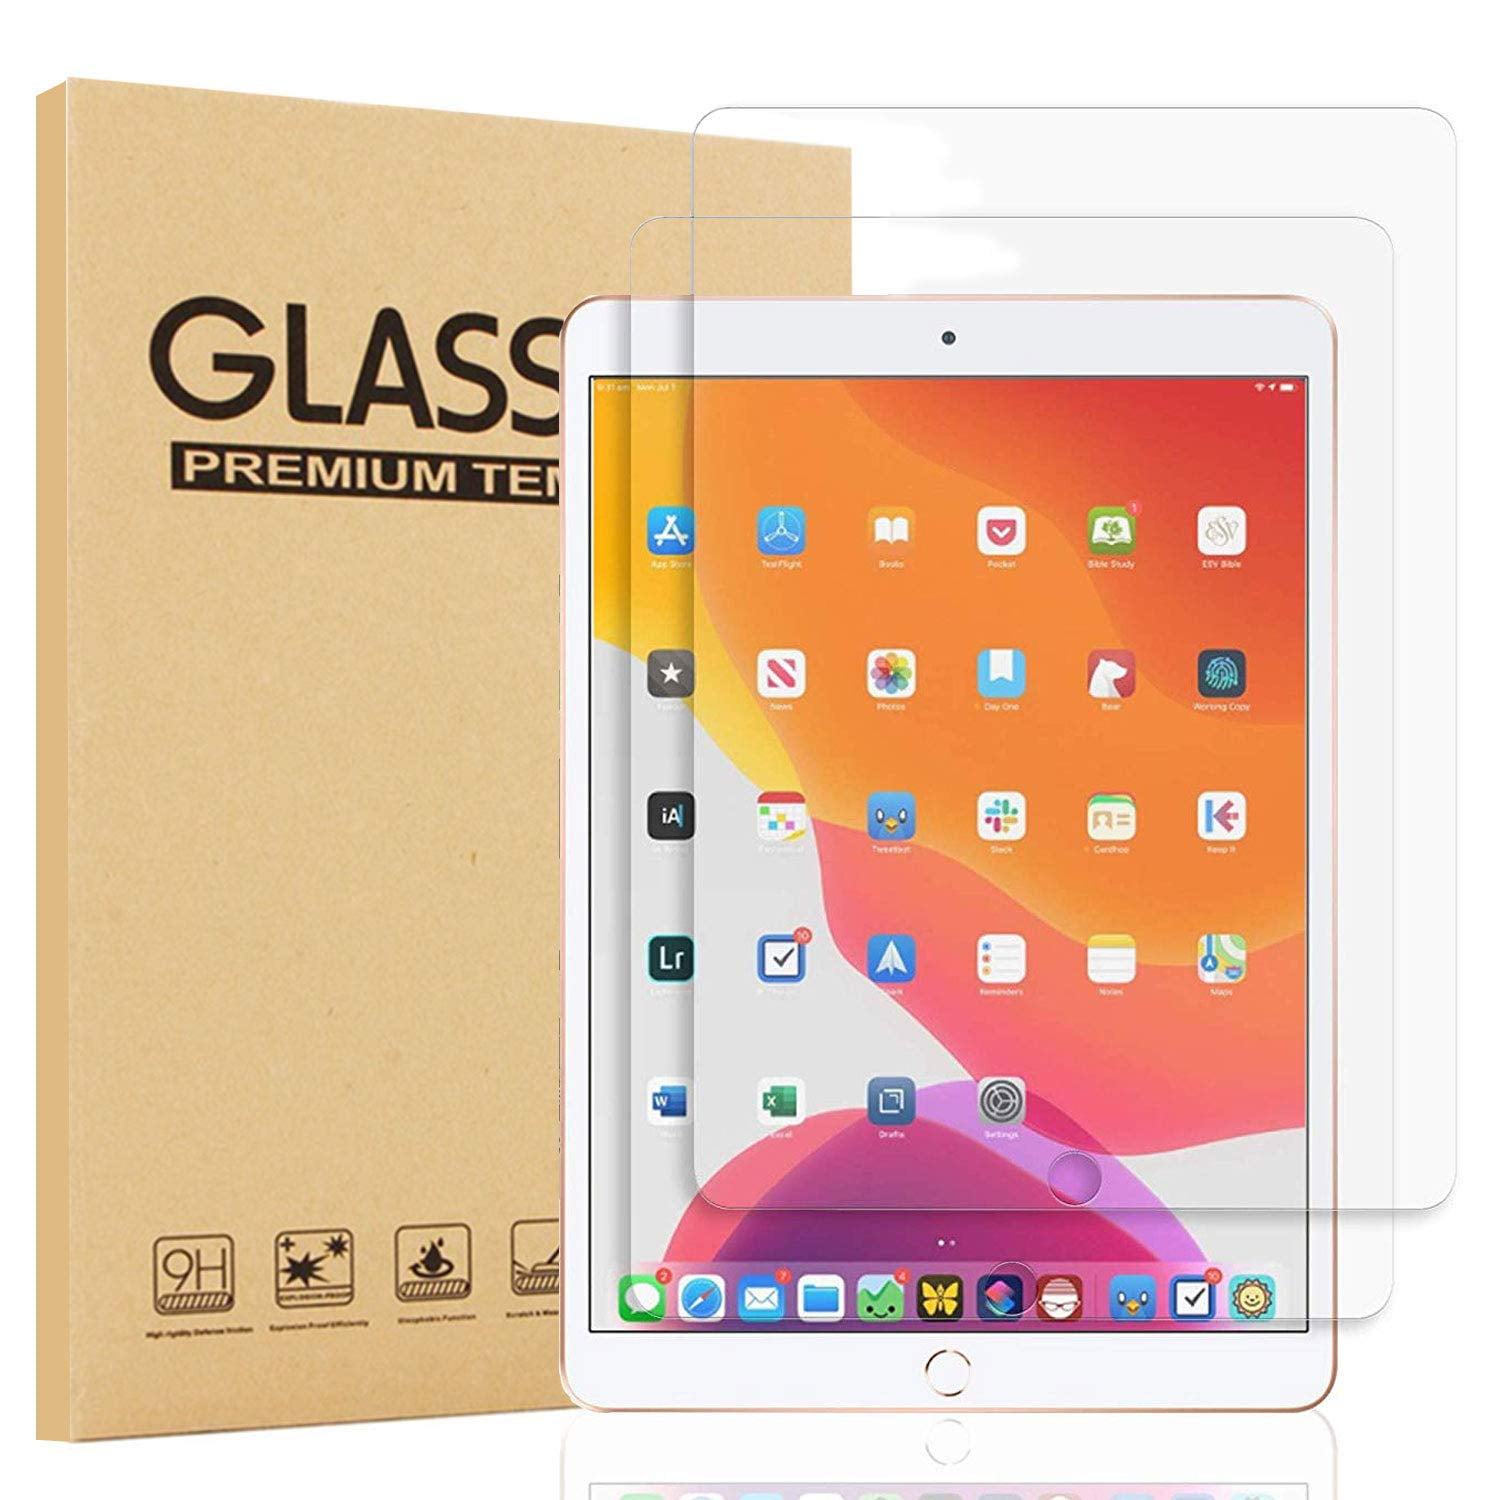 App Card Cloth 2X Clear Screen Protector Guard Cover For Apple iPad 2 2nd Gen